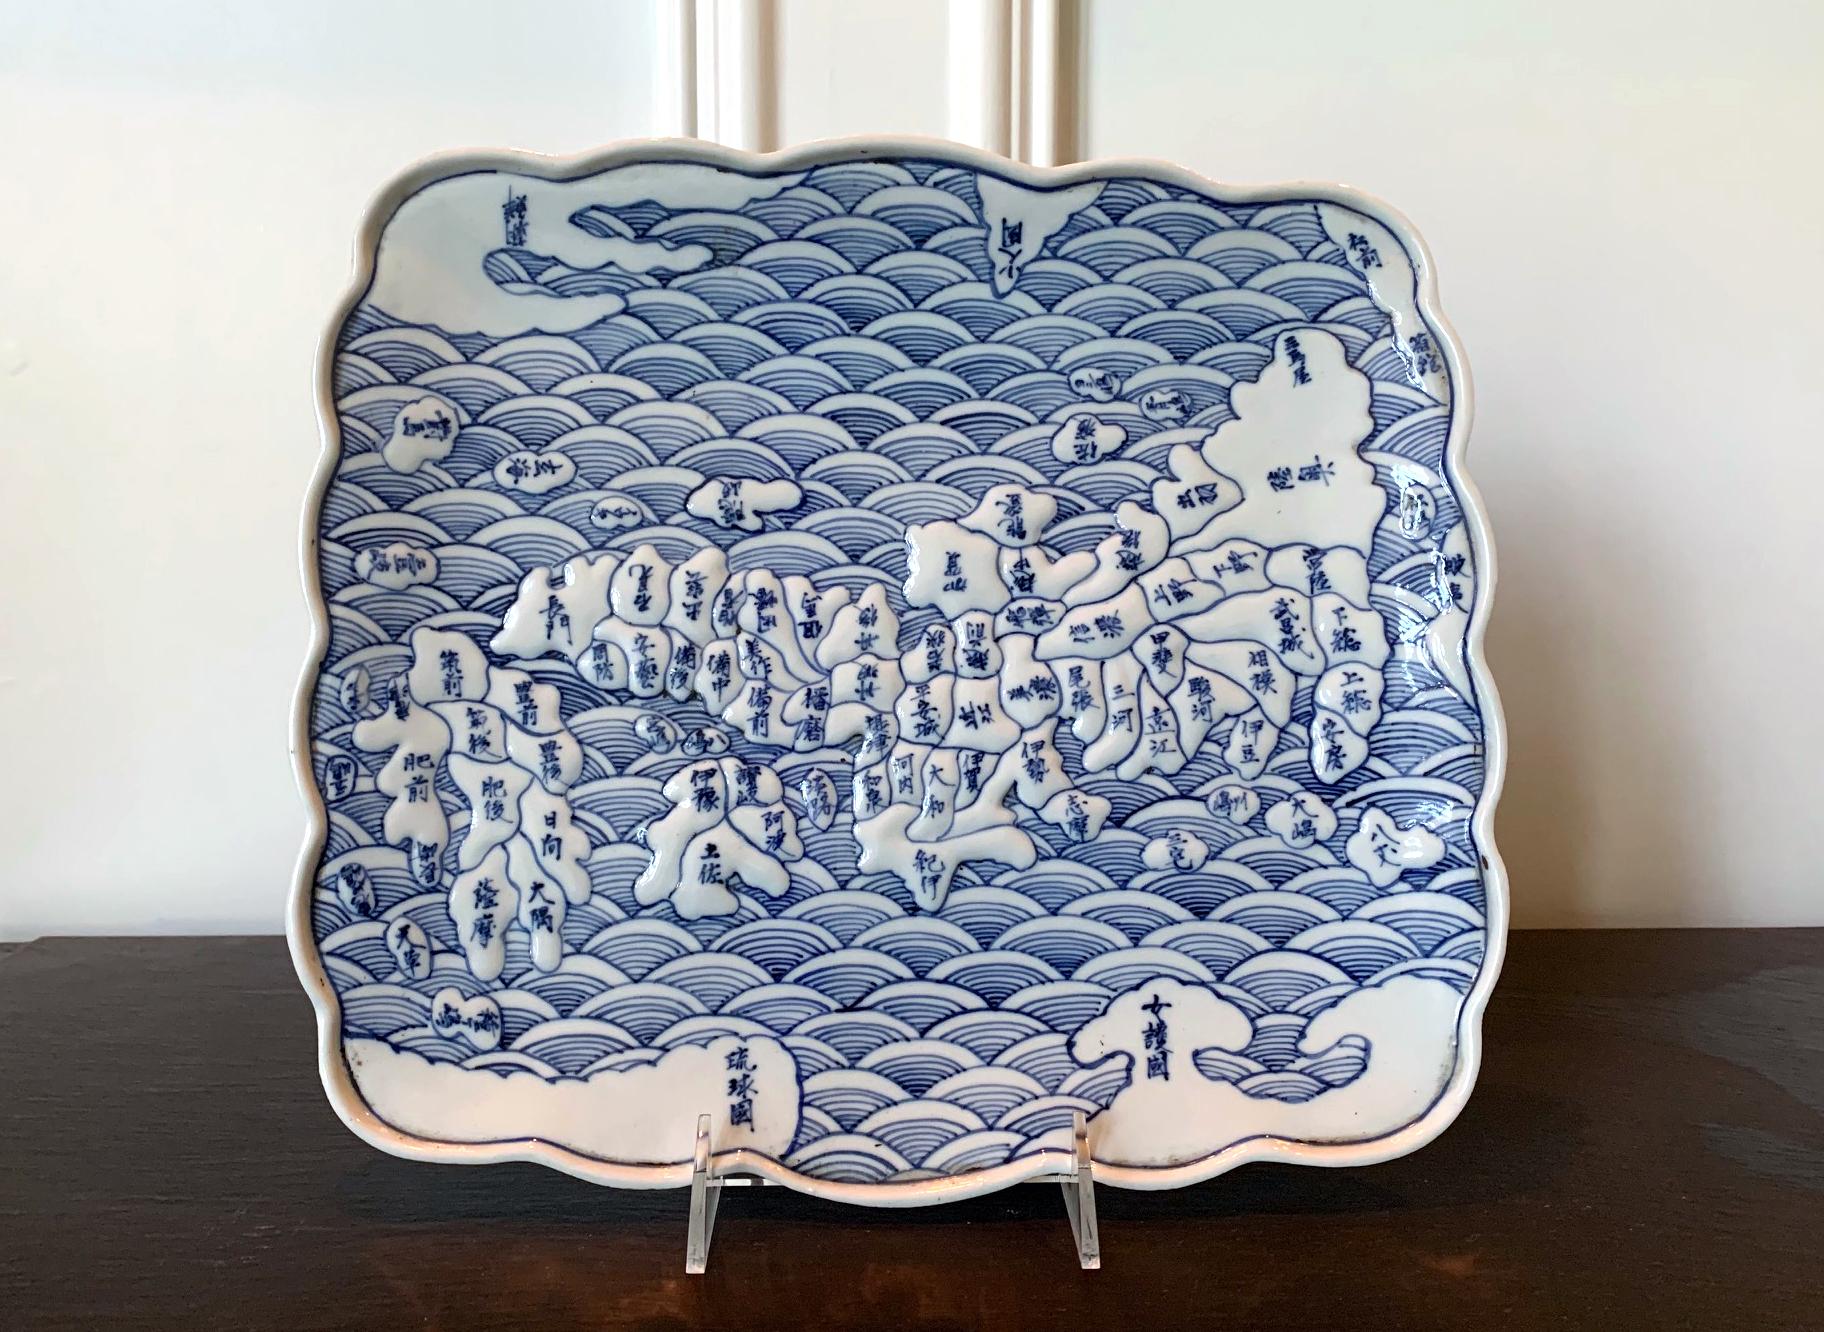 A rectangular form ceramic map plate from Arita, Japan, circa Tenpo years (1830-1844) of late Edo Period.
This piece of unusual blue and white Arita ware features the novel use of maps as underglaze decoration, a phenomena appeared in Japan in the